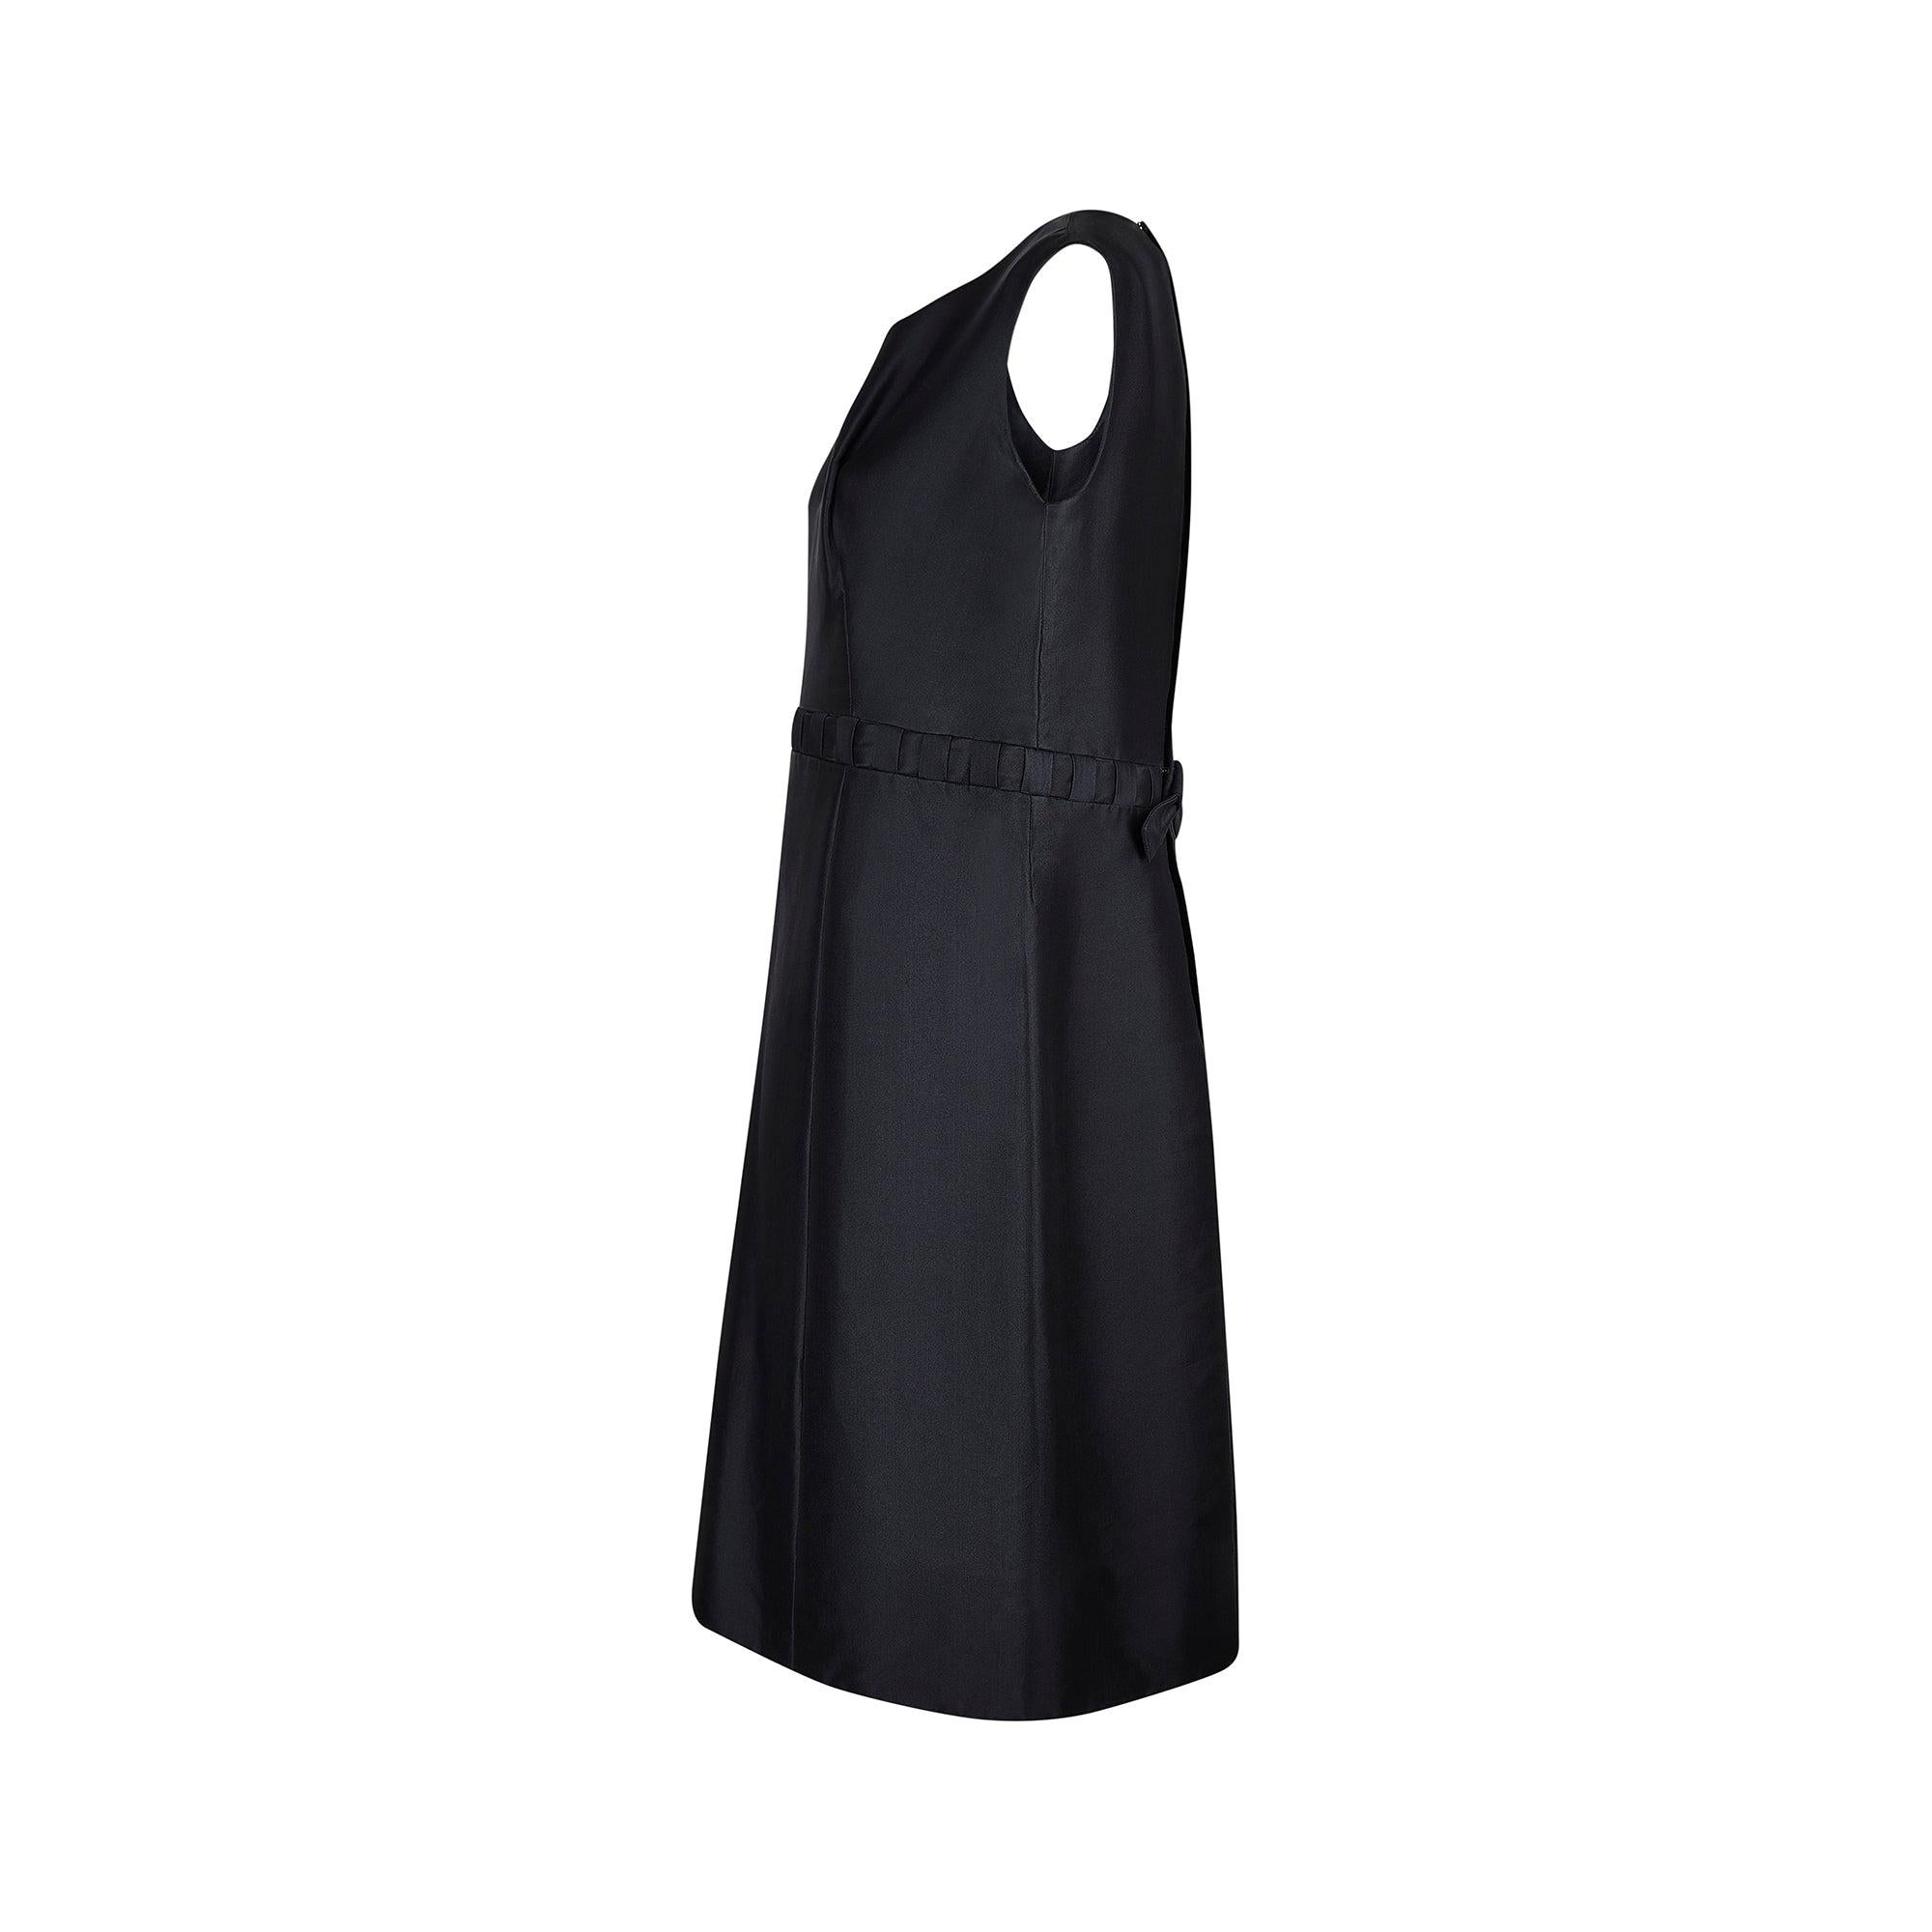 This elegant shift dress was created by Pierre Balmain in his 1960s heyday. Extolled for the sculptural quality that characterises his work, Balmain lovingly described dressmaking as 